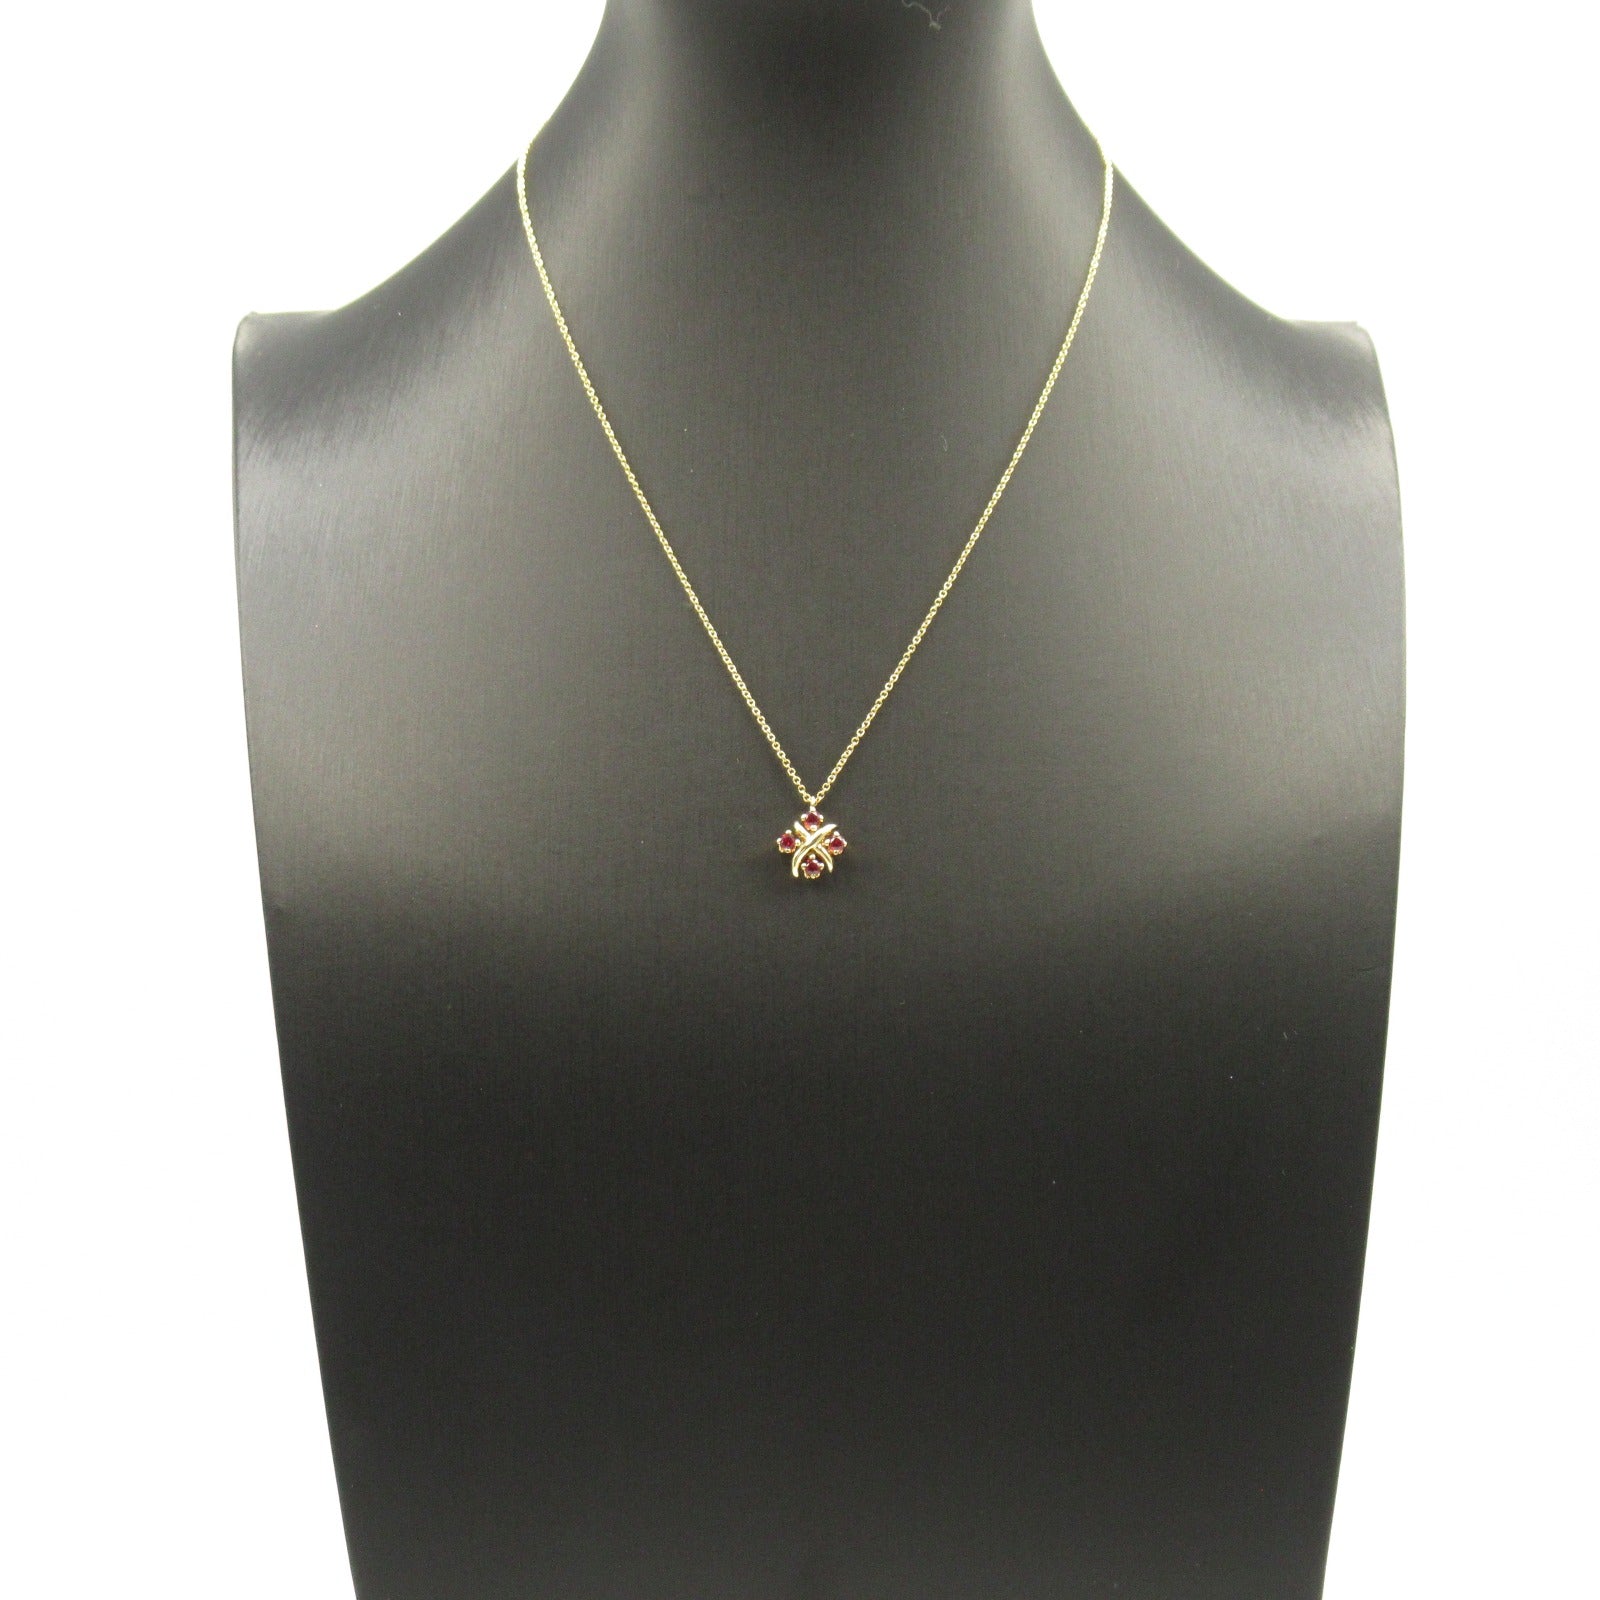 Tiffany TIFFANY&amp;CO Jean Schlumberger Lin ru necklace necklace jewelry K18 (yellow g) ruby ladies red